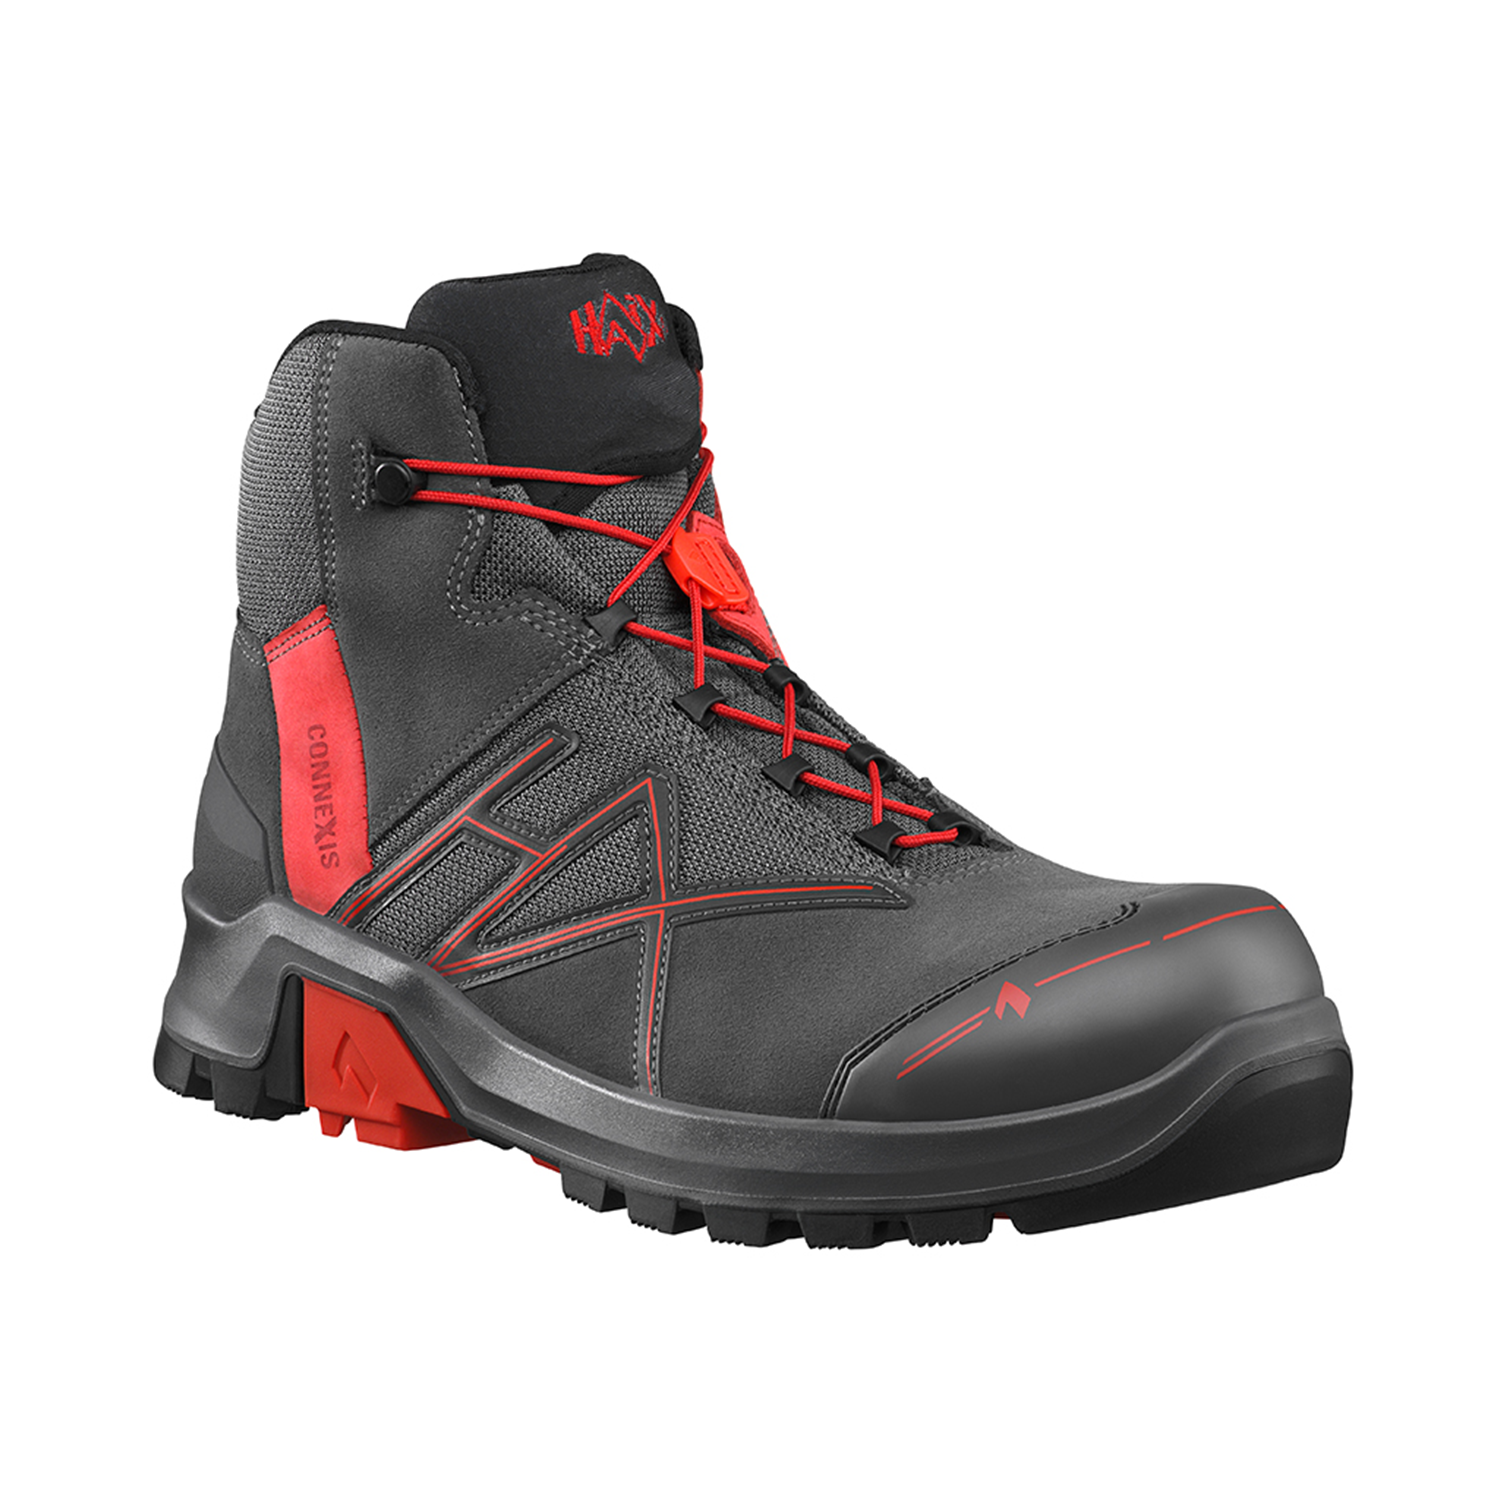 CONNEXIS Safety+ GTX mid/grey-red